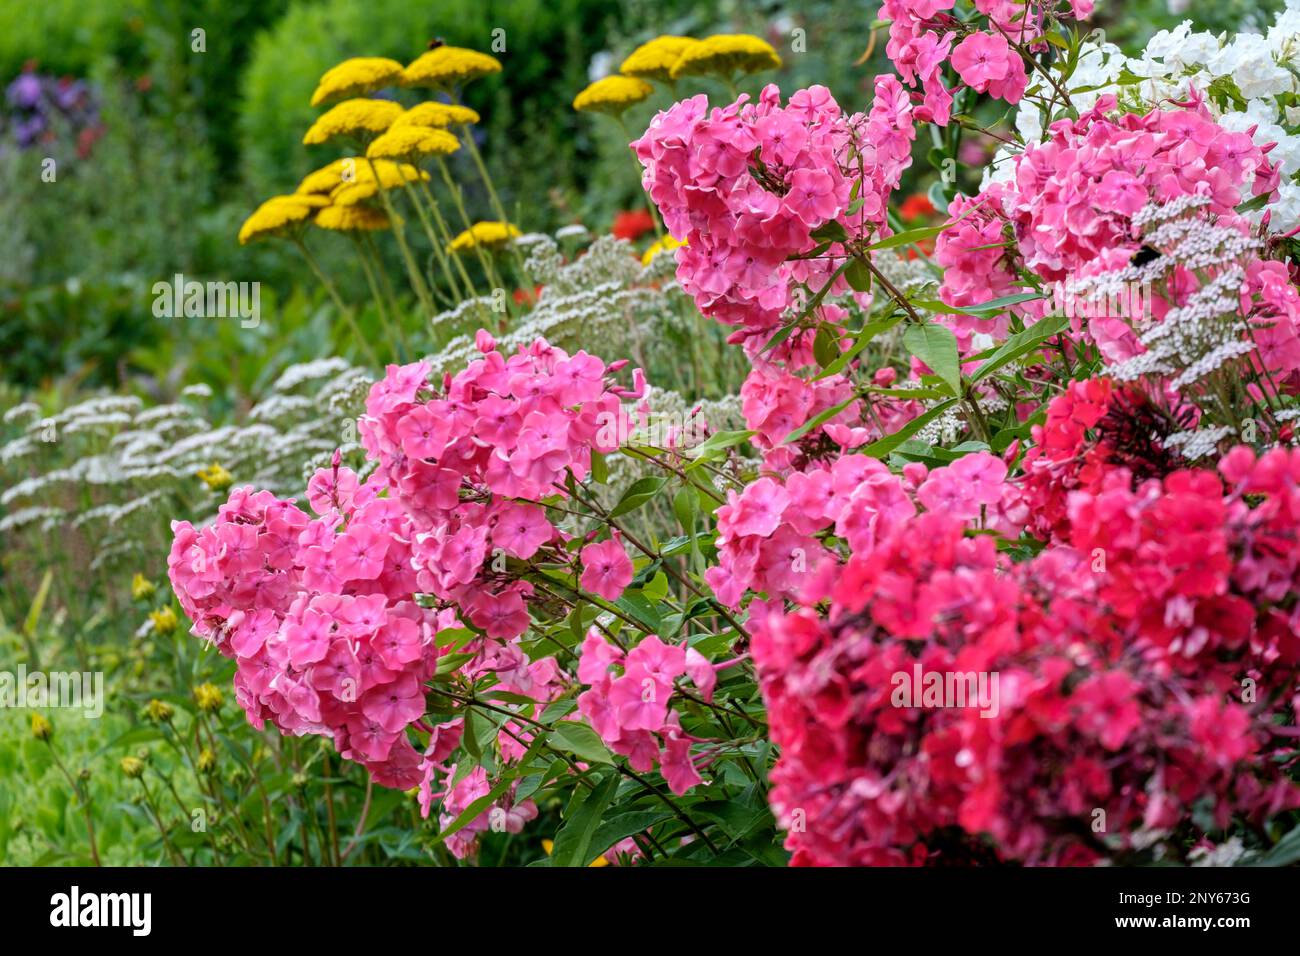 Perennial bed with flame flowers Stock Photo